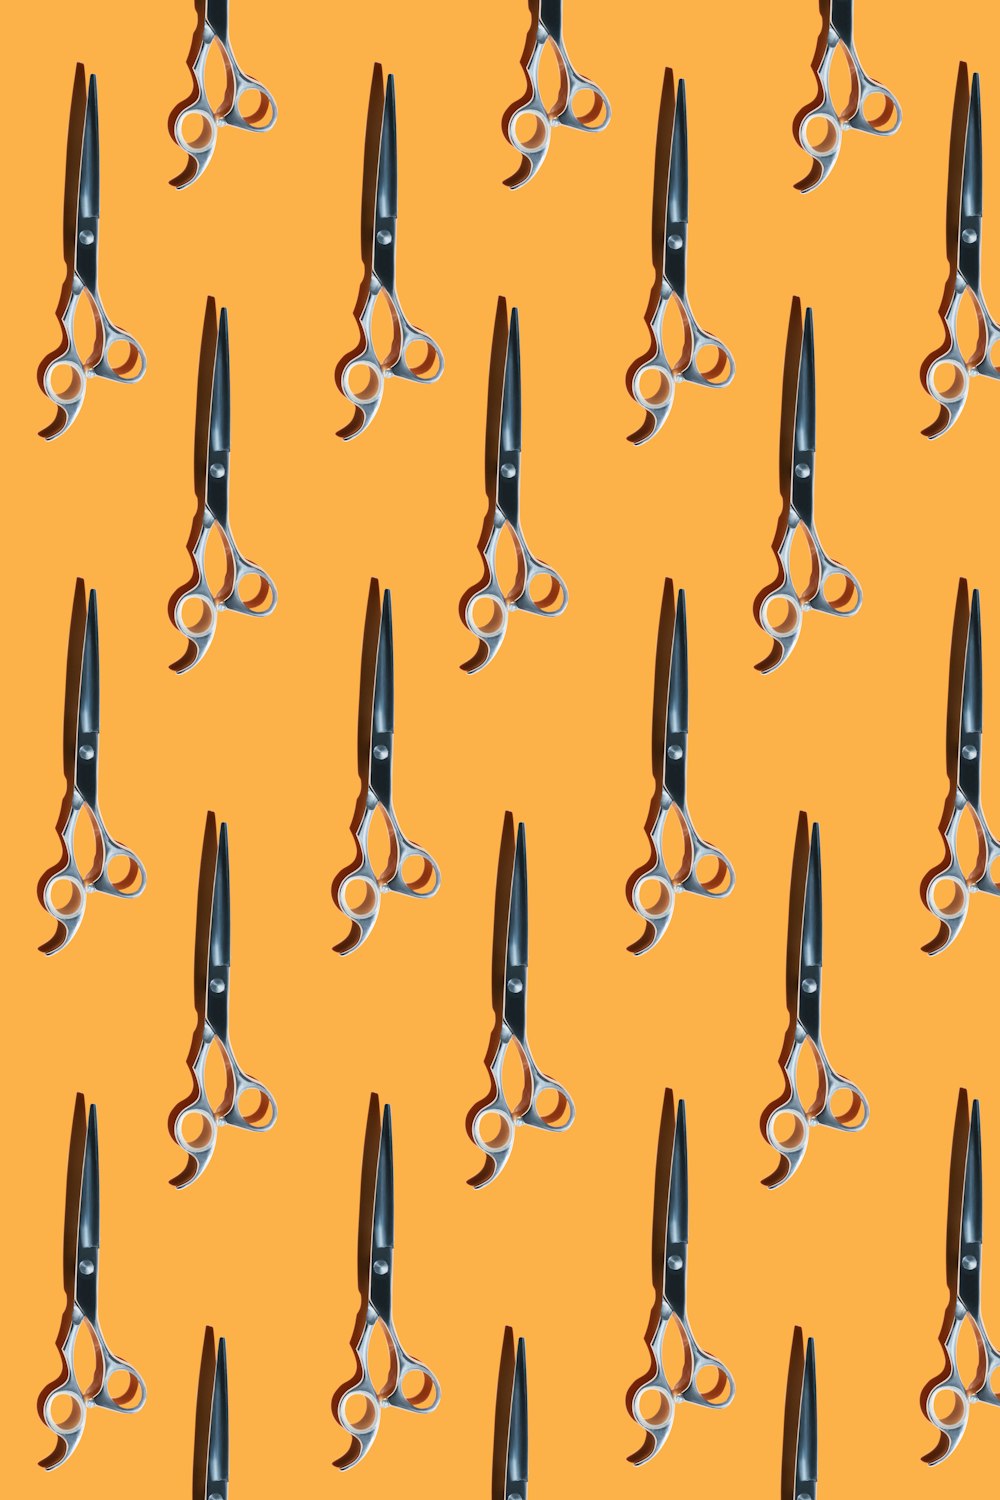 a bunch of scissors that are on a yellow background